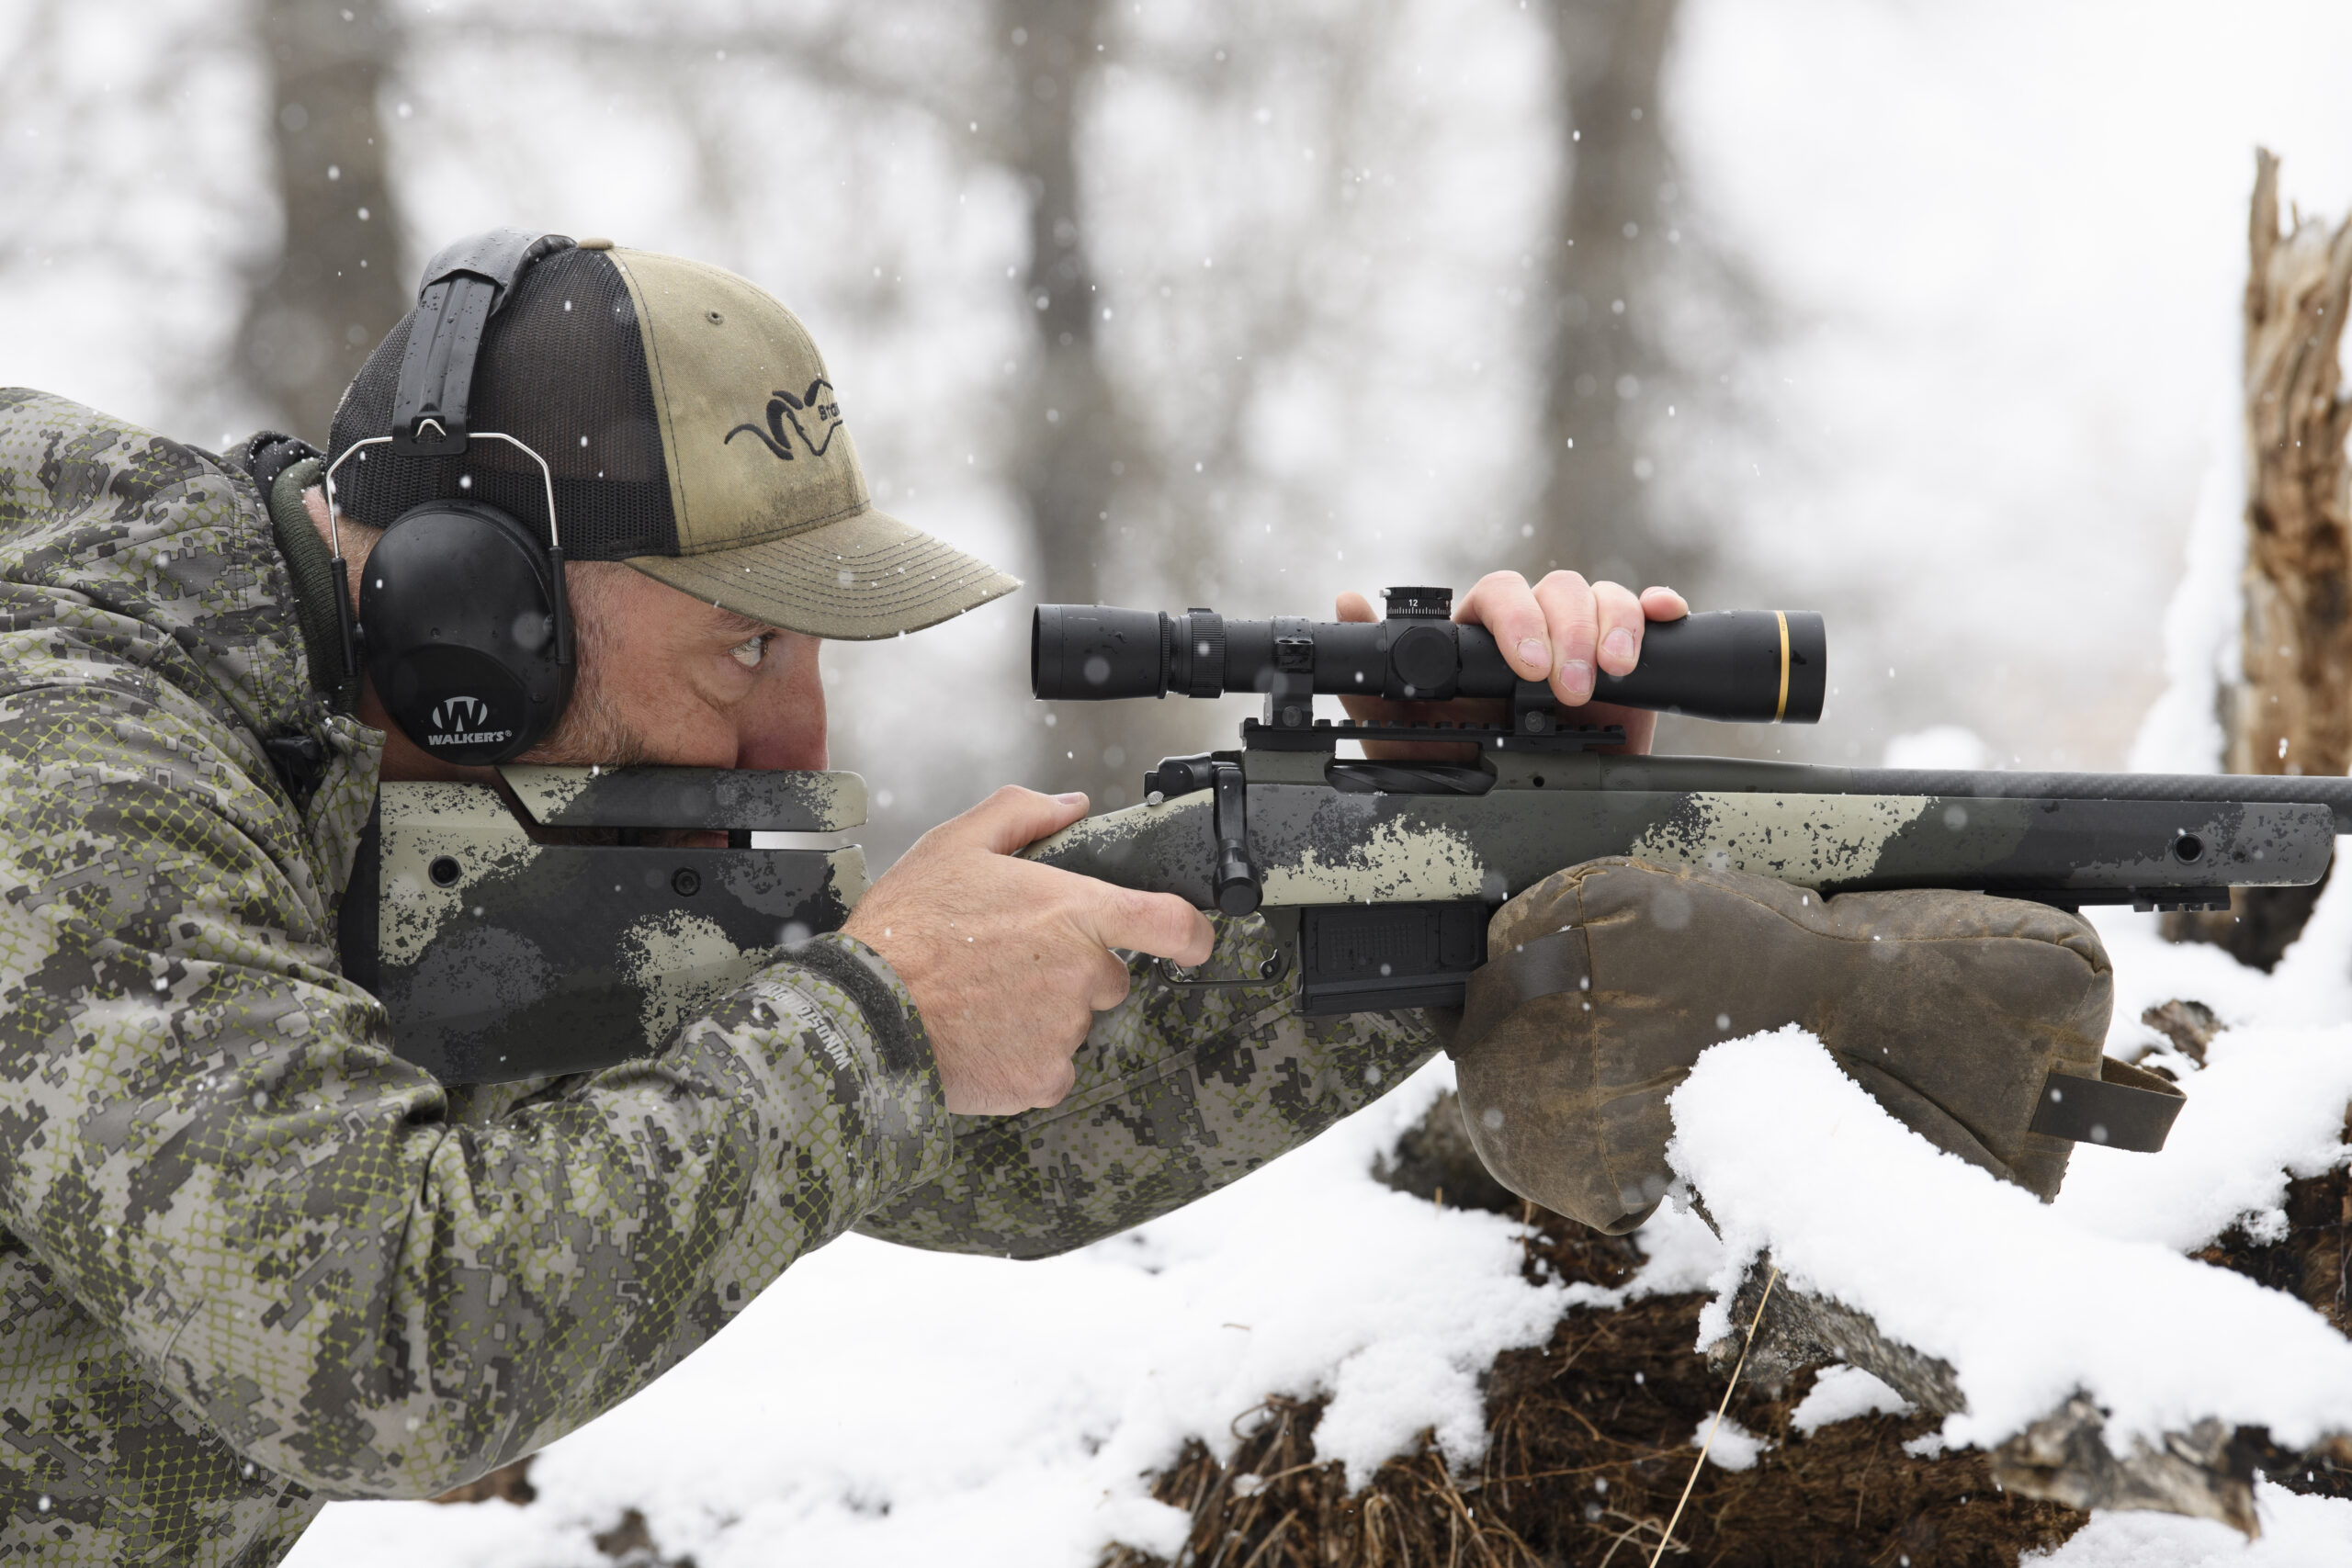 A hunter steadies his Springfield Waypoint bolt-action rifle on top of a shooting bag resting on a branch in a snowy field.